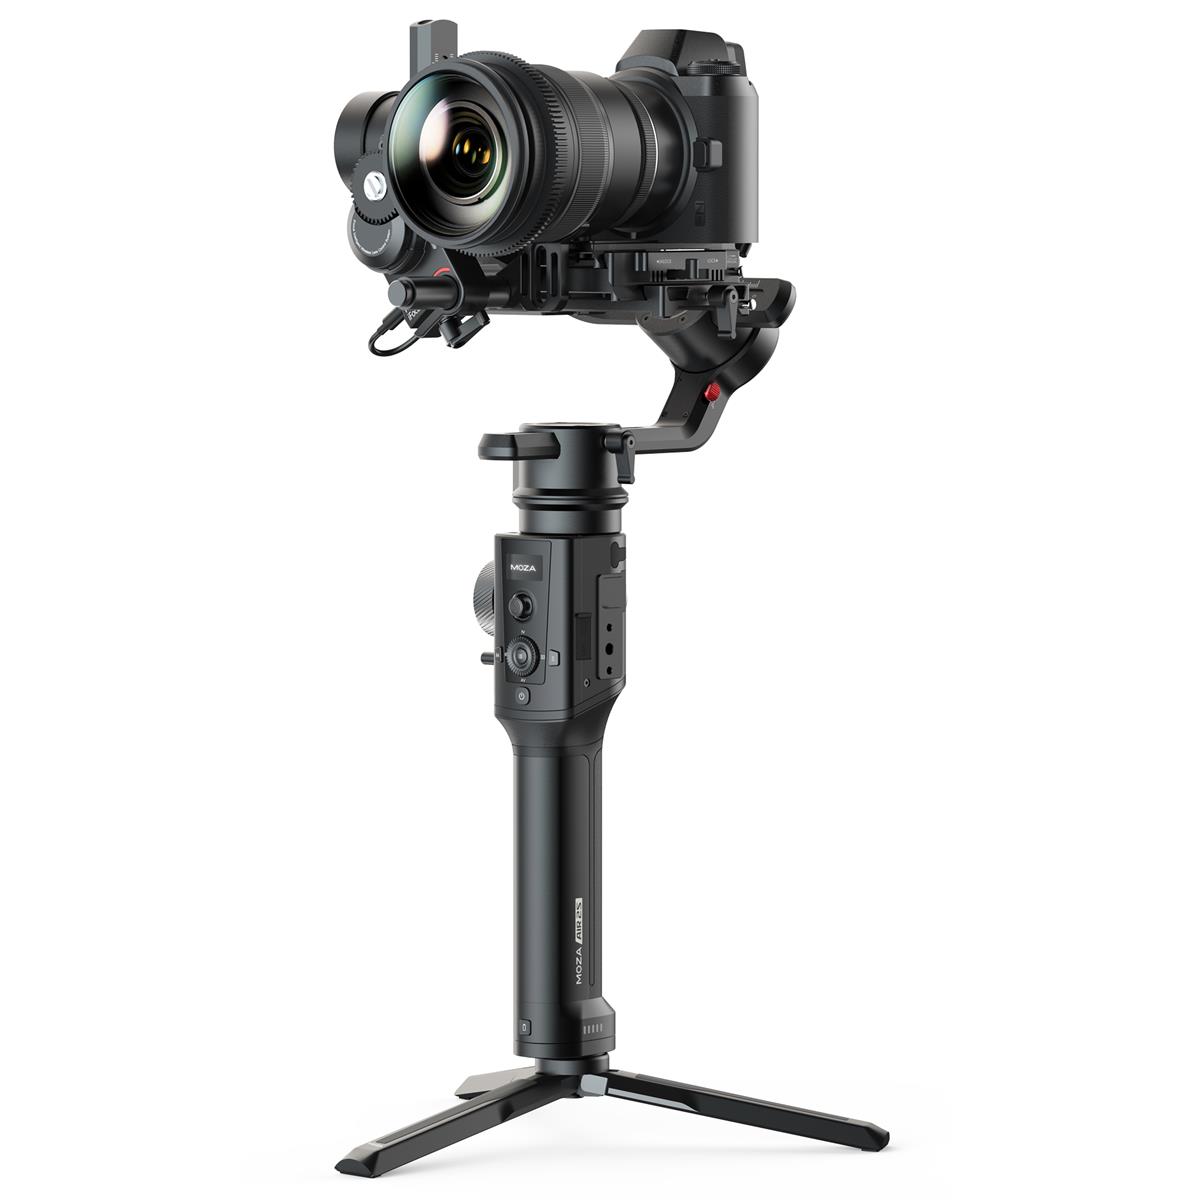 Moza Air 2S 3-Axis Handheld Gimbal Stabilizer $300 + free s/h at Adorama